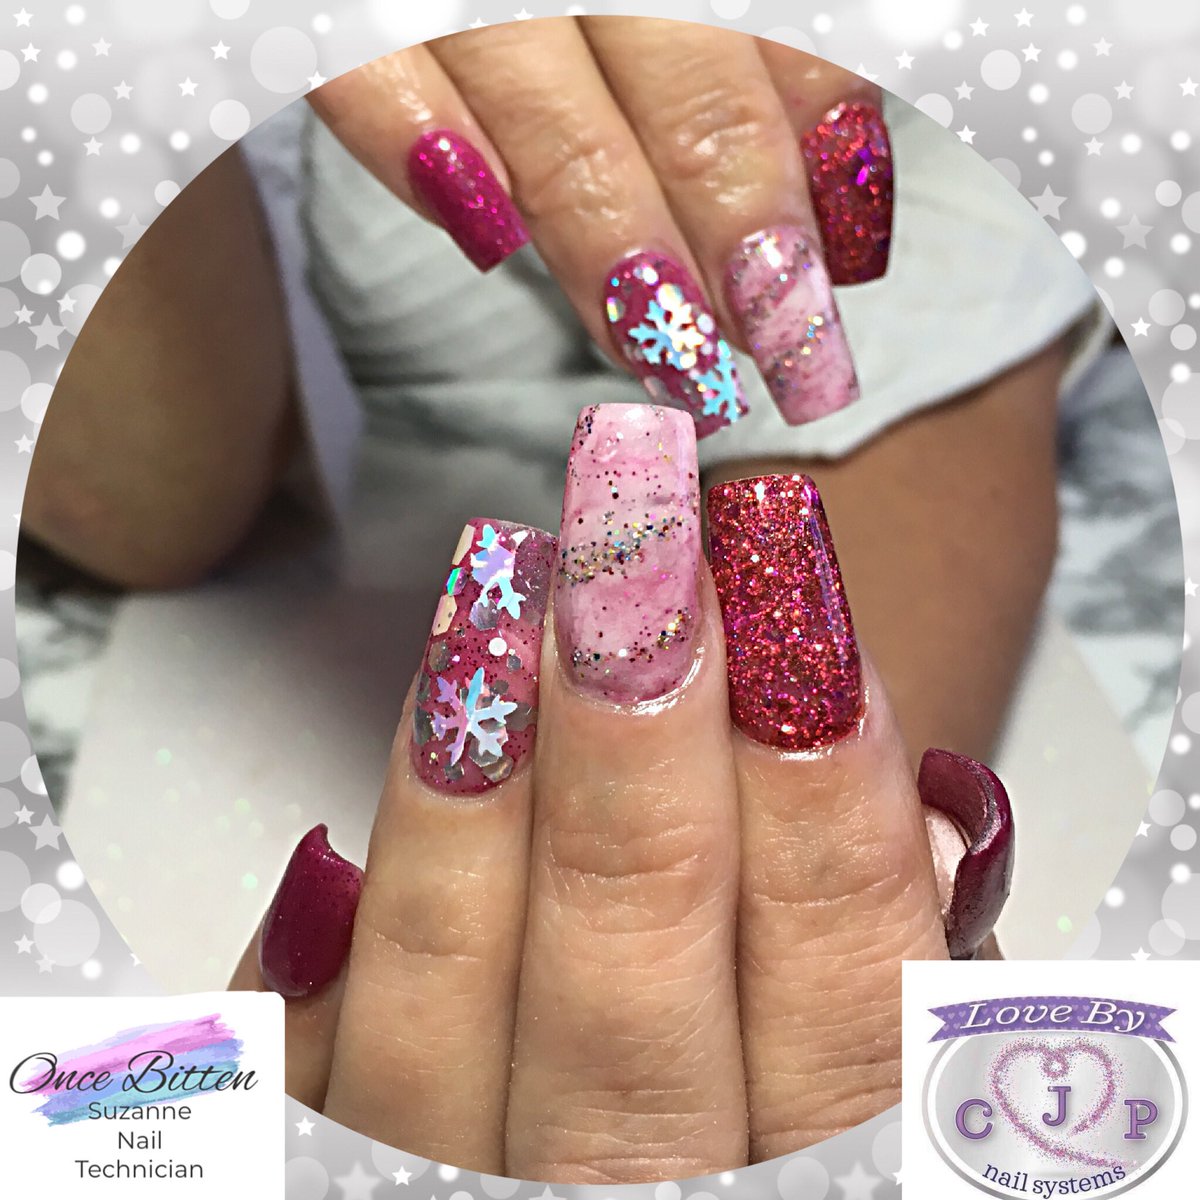 Followed by Jackie’s acrylic extensions
#CJPAcrylicSystems #JazzBerry #SnowWhite #NailArt
#Pampertime #Homebased 
#StockportNailTech #SK5Reddish
#NailsOfInstagram #ShowScratch
#ScratchMagazine #NailPro #SWNailShares #Nails
#NailPromote #InstaNails 
#NailedIt #NailsOfTheDay